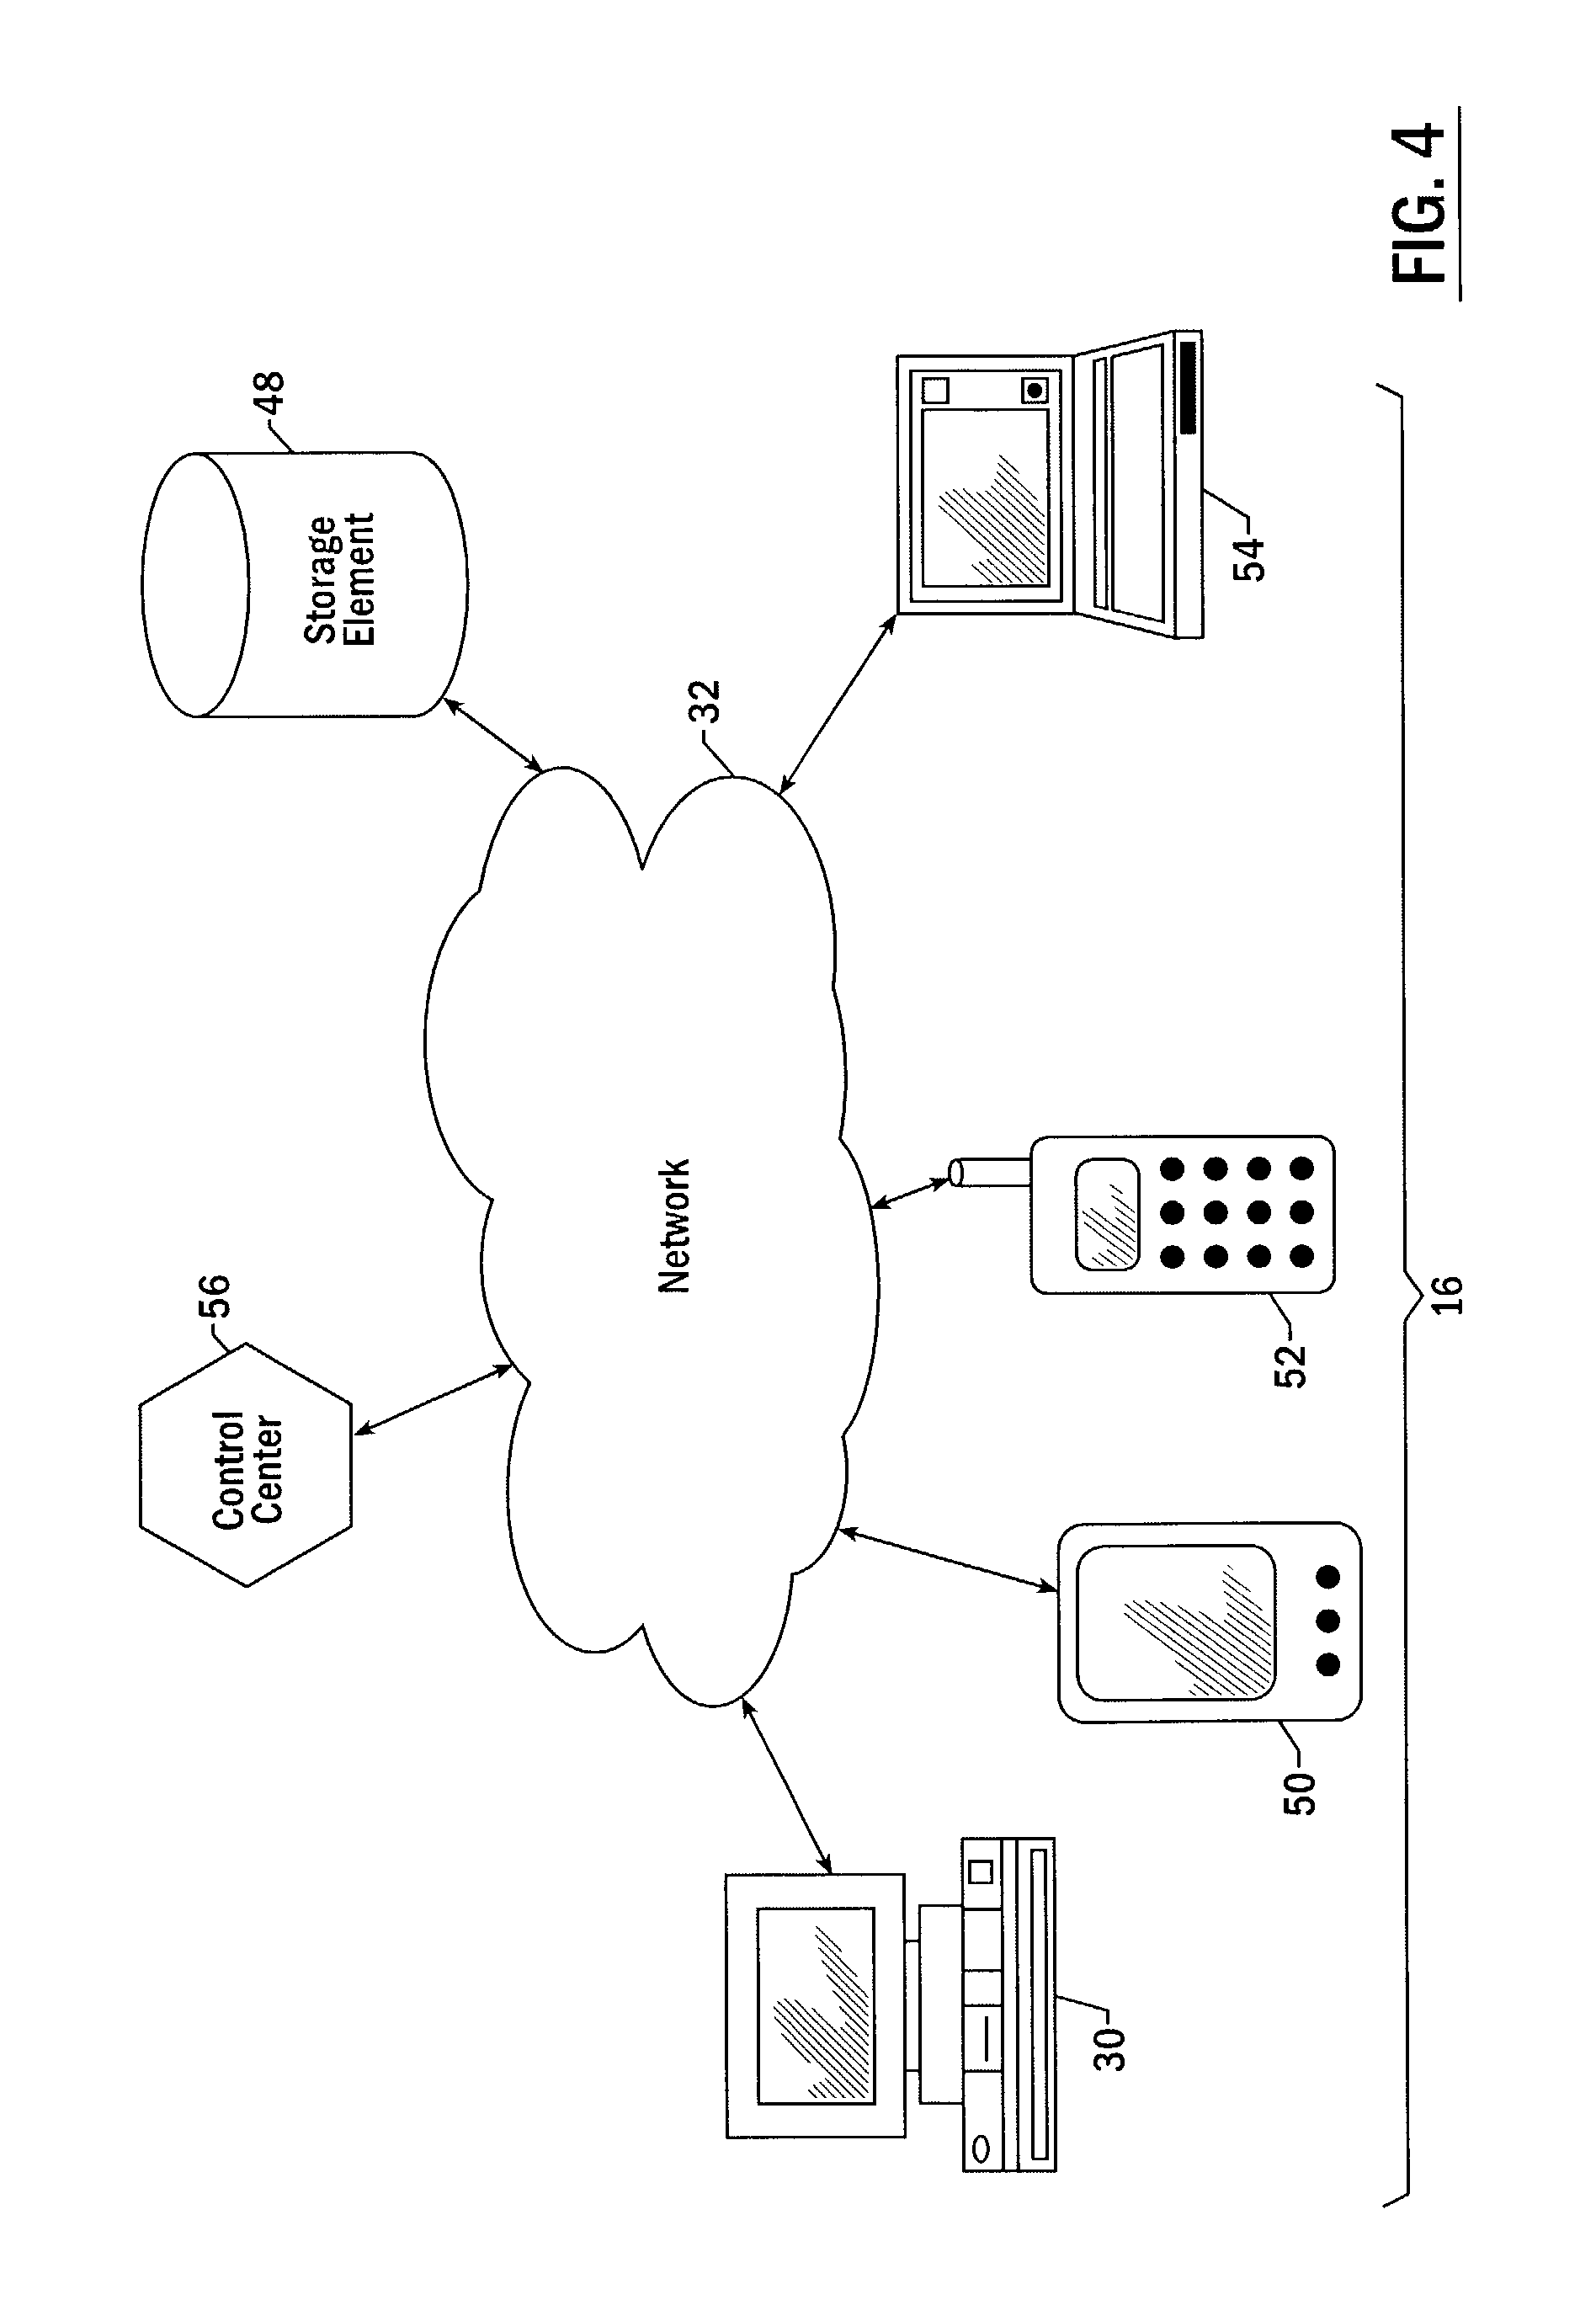 Security clearance card, system and method of reading a security clearance card